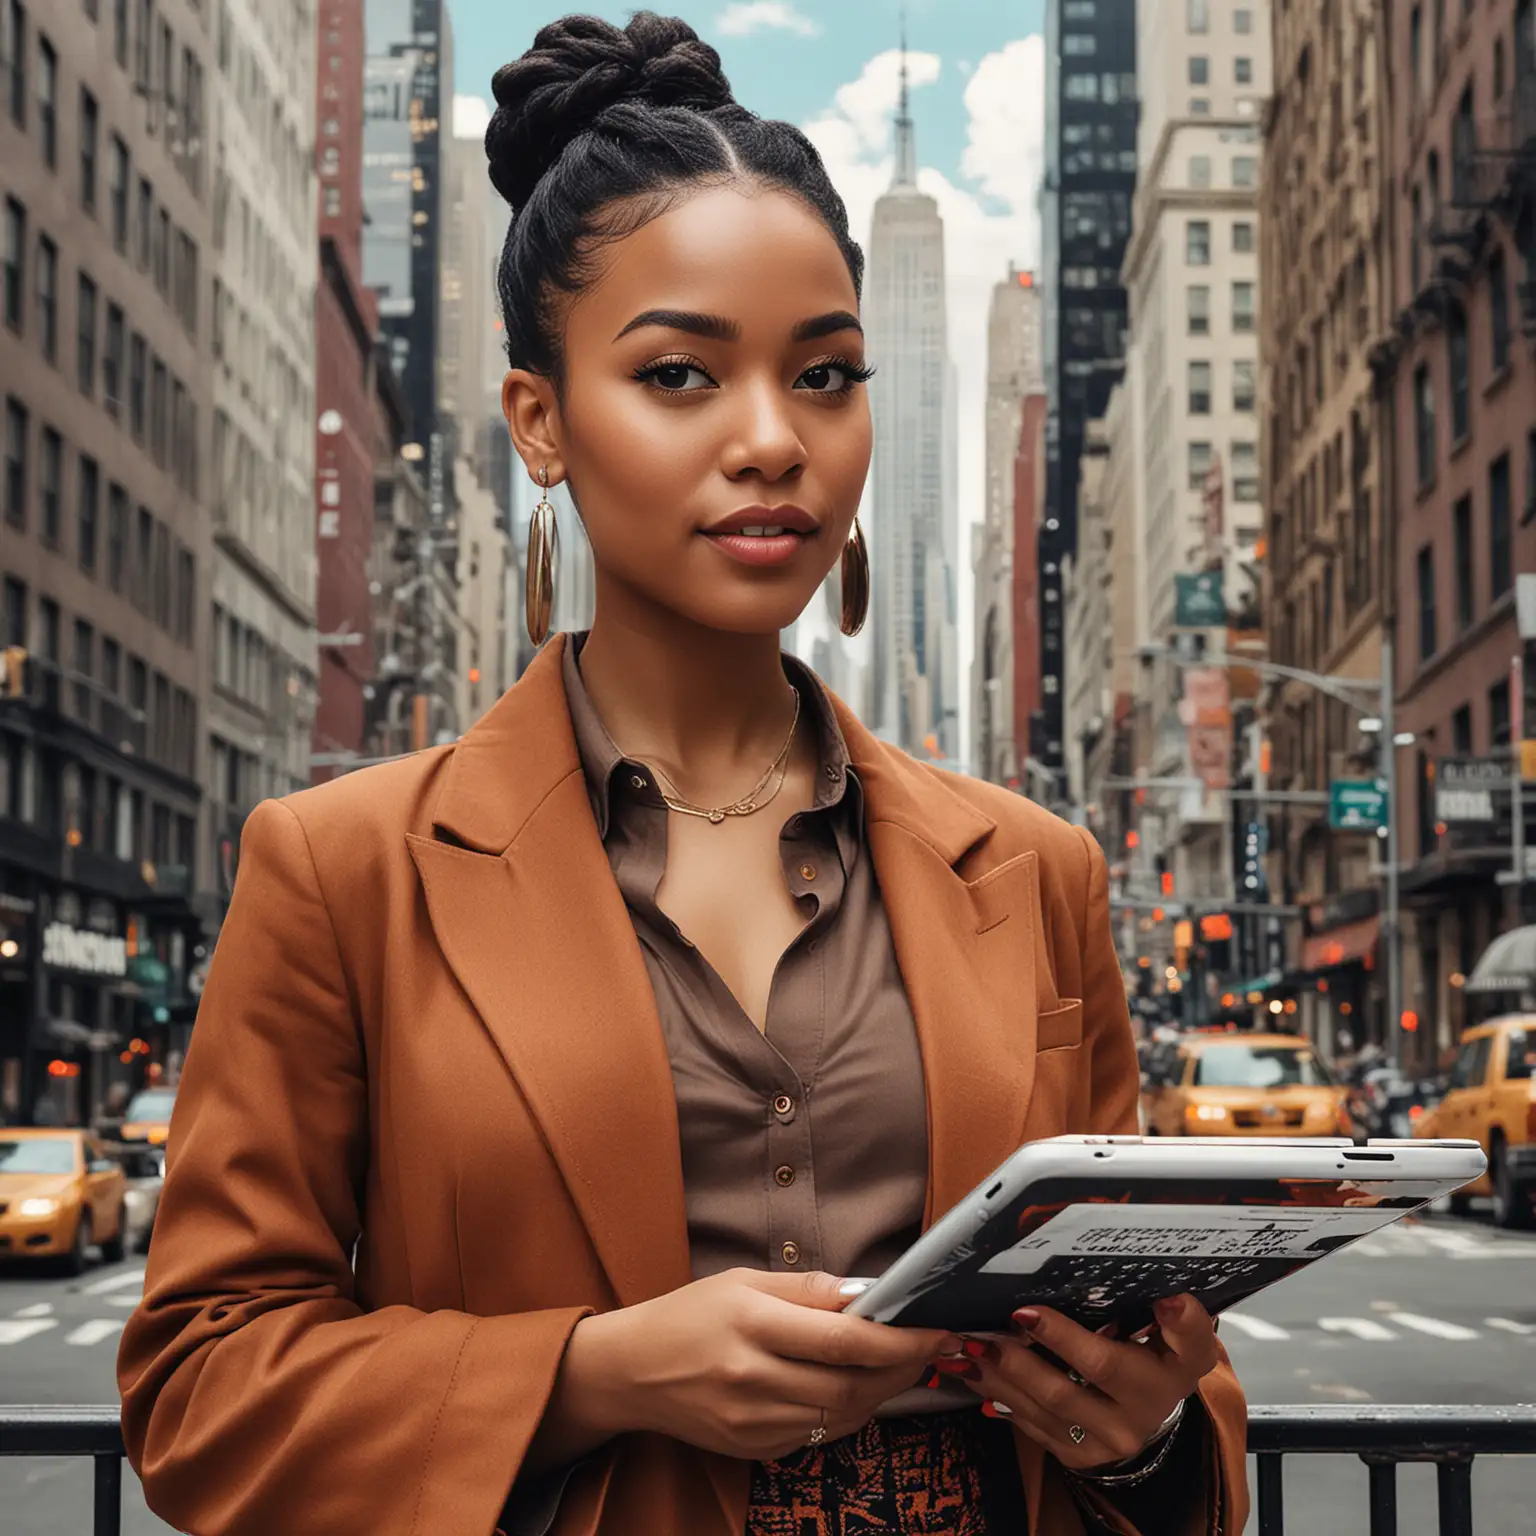 Design a sleek and professional book cover for a business planner digital product titled 'Dwntwnhustle: Your Ultimate Business Planner.' The cover should feature a realistic melanated model with a blend of indigenous and Eurocentric features, black hair, and brown skin. She is dressed in stylish professional attire, standing confidently in the vibrant streets of New York City. She holds a laptop in one hand and an iPhone in the other, exuding a badass, entrepreneurial spirit. Incorporate elements of the bustling NYC cityscape in the background, with bold, modern typography for the title and subtitle. Use a color palette that reflects the energy and hustle of the city.